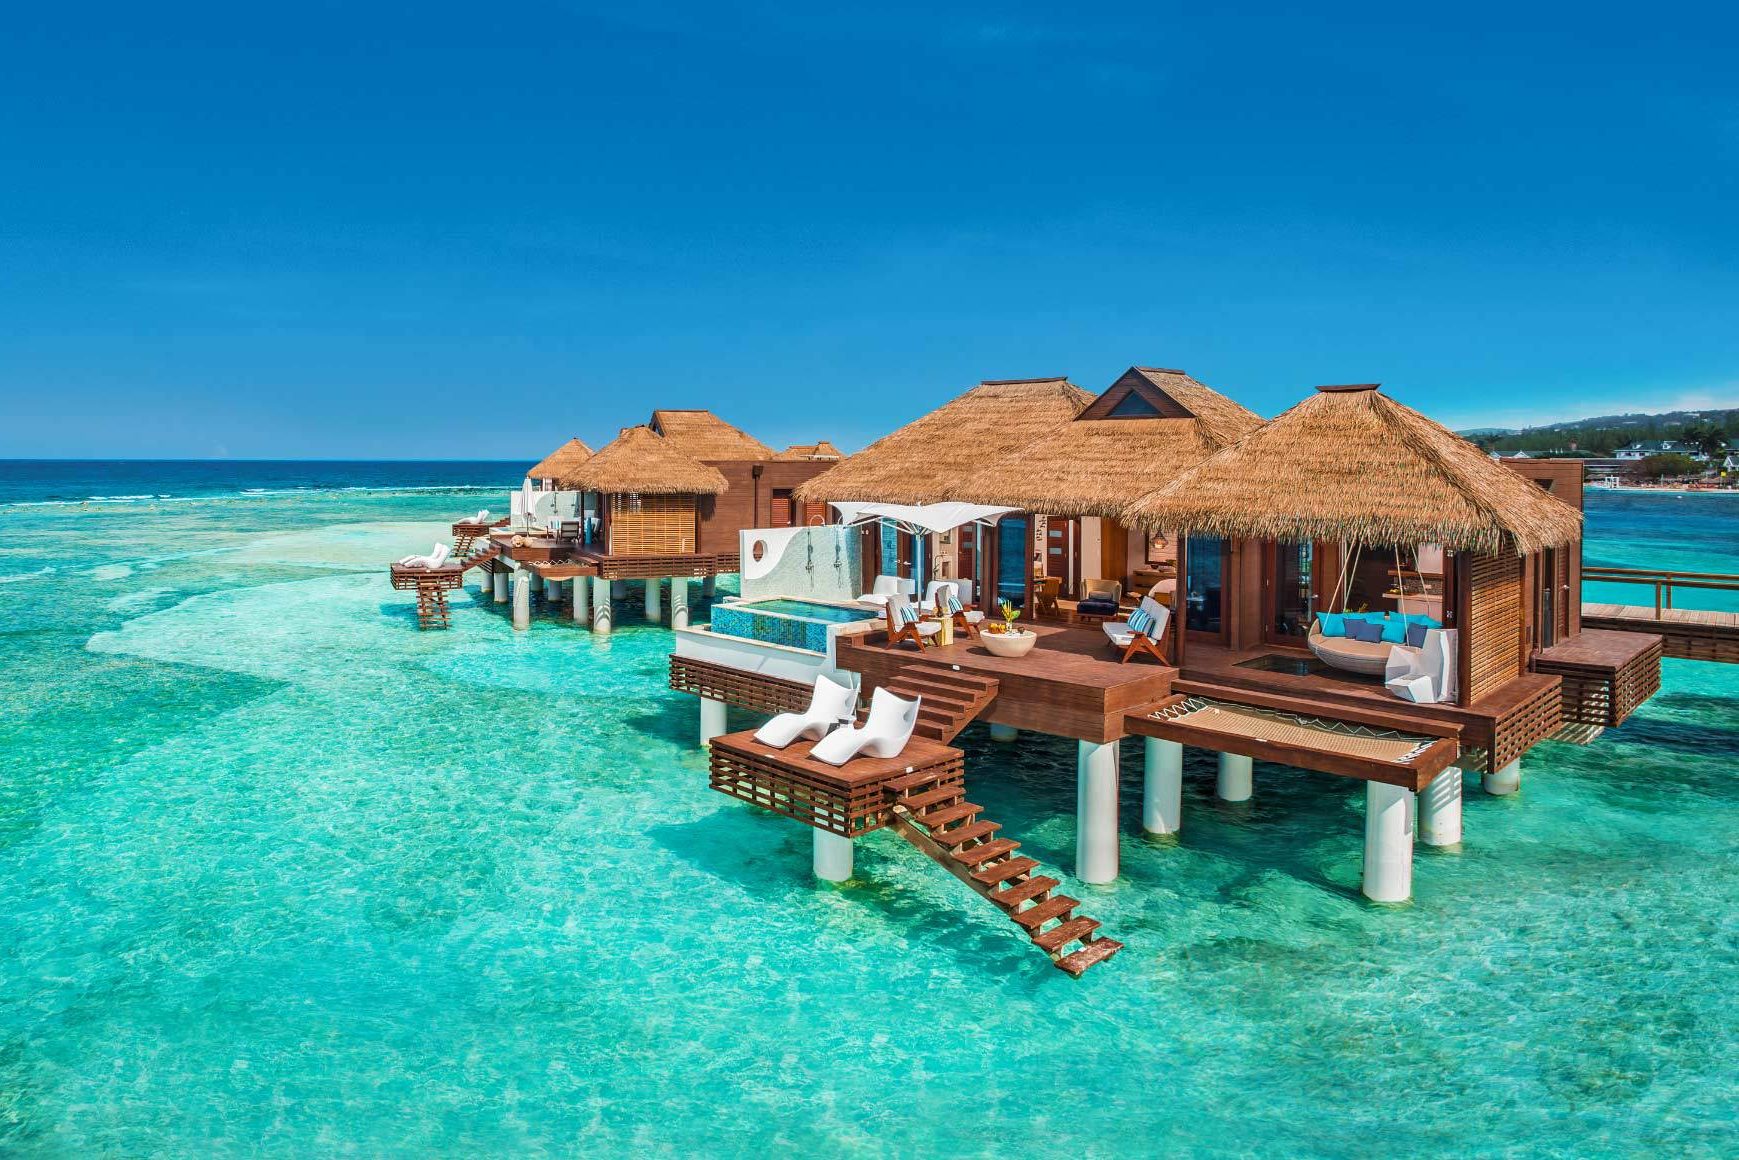 Row of overwater bungalows at Sandals Royal Caribbean, Jamaica